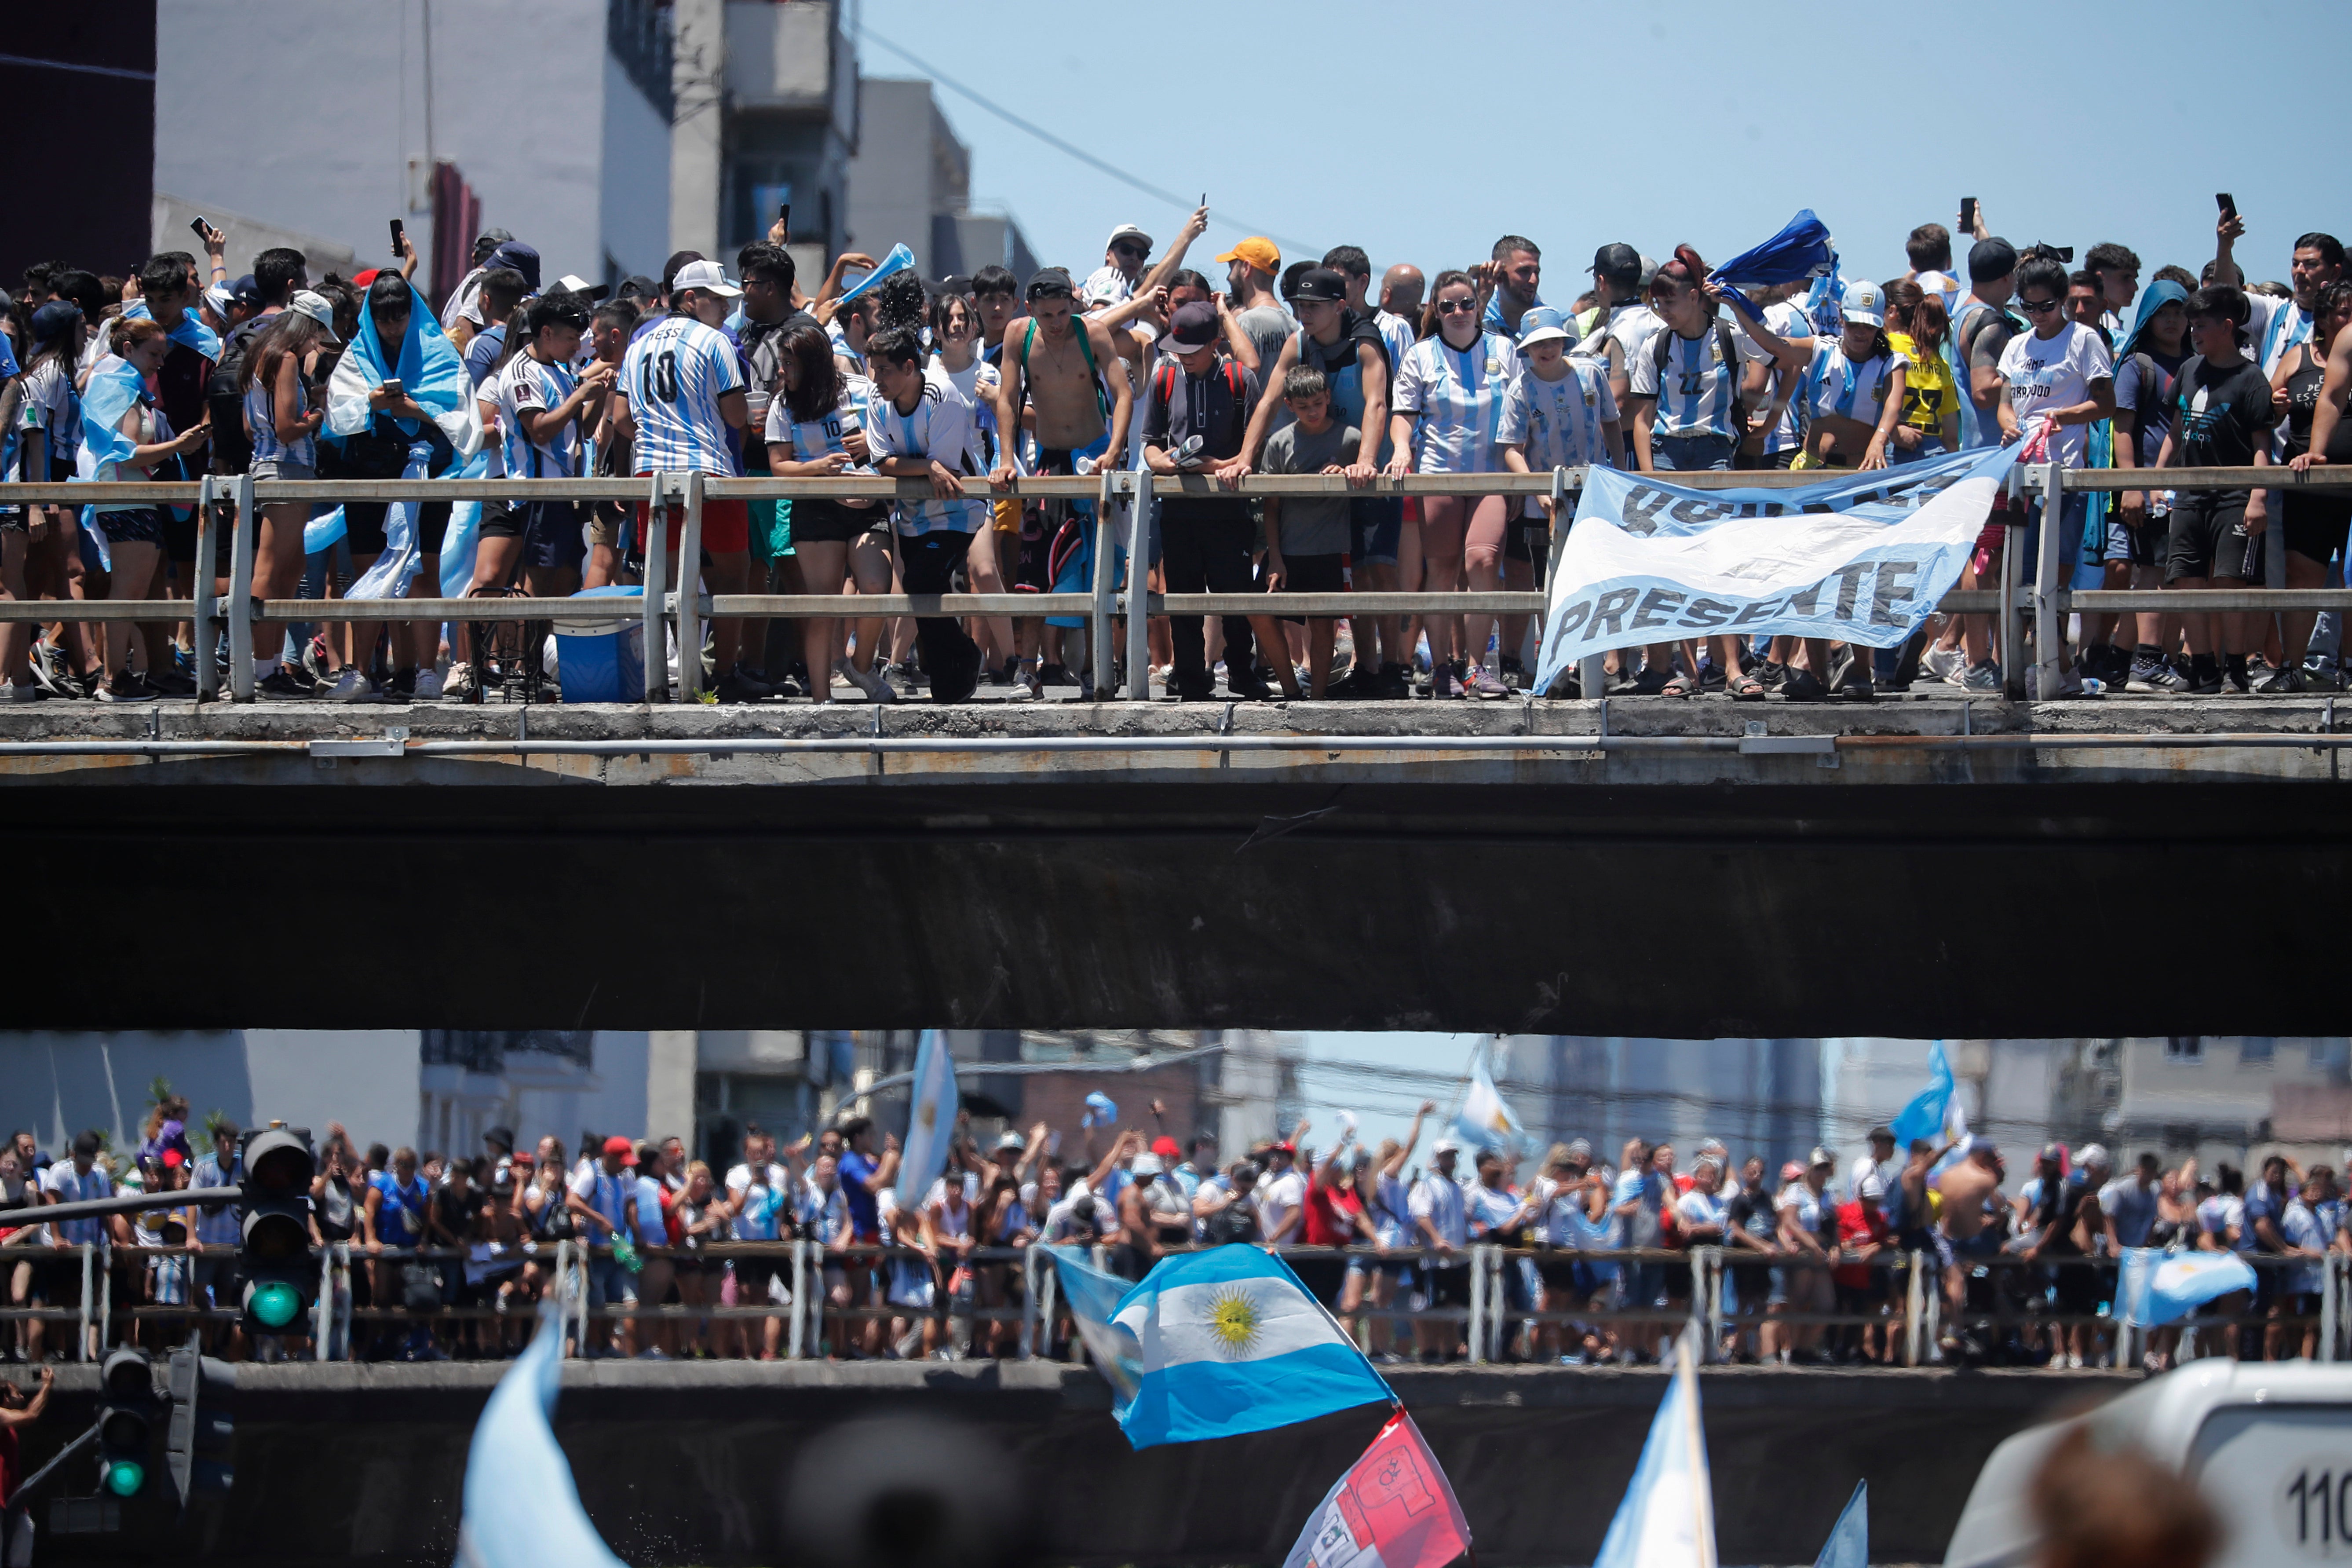 An estimated 4 million people lined the streets of Buenos Aires to celebrate the Argentina team’s return